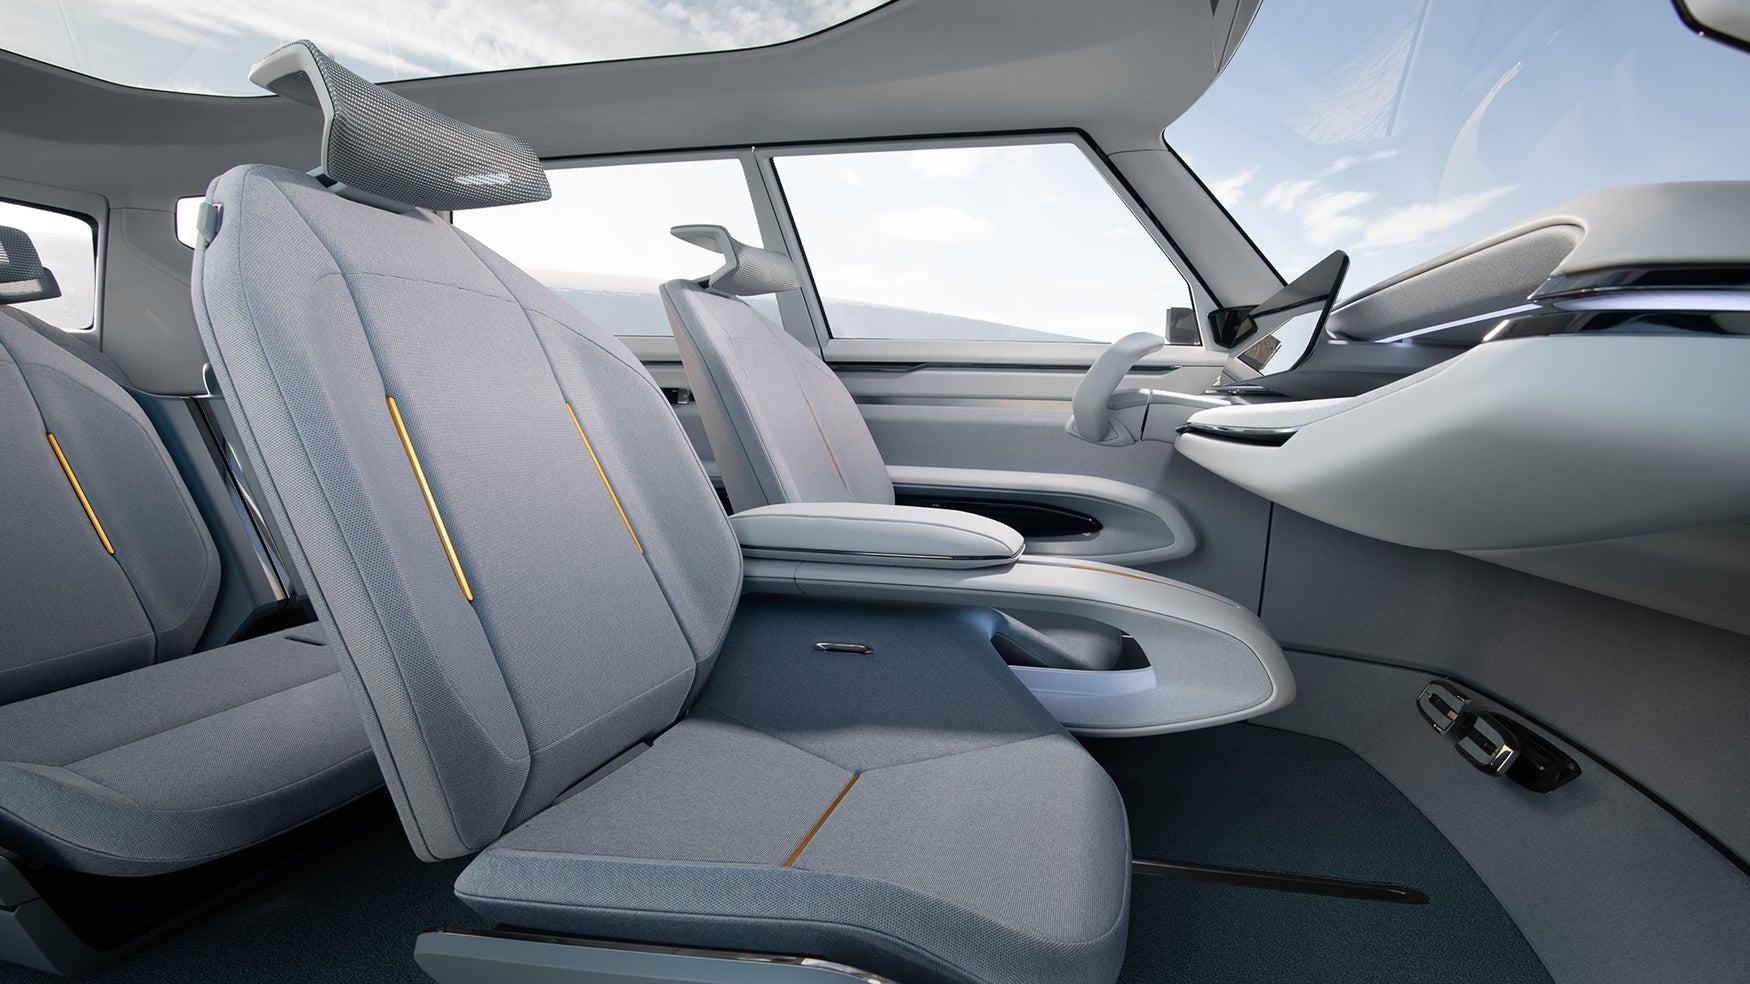 Picture of the Kia EV9's interior showing flat floor and standalone centre console between front seats